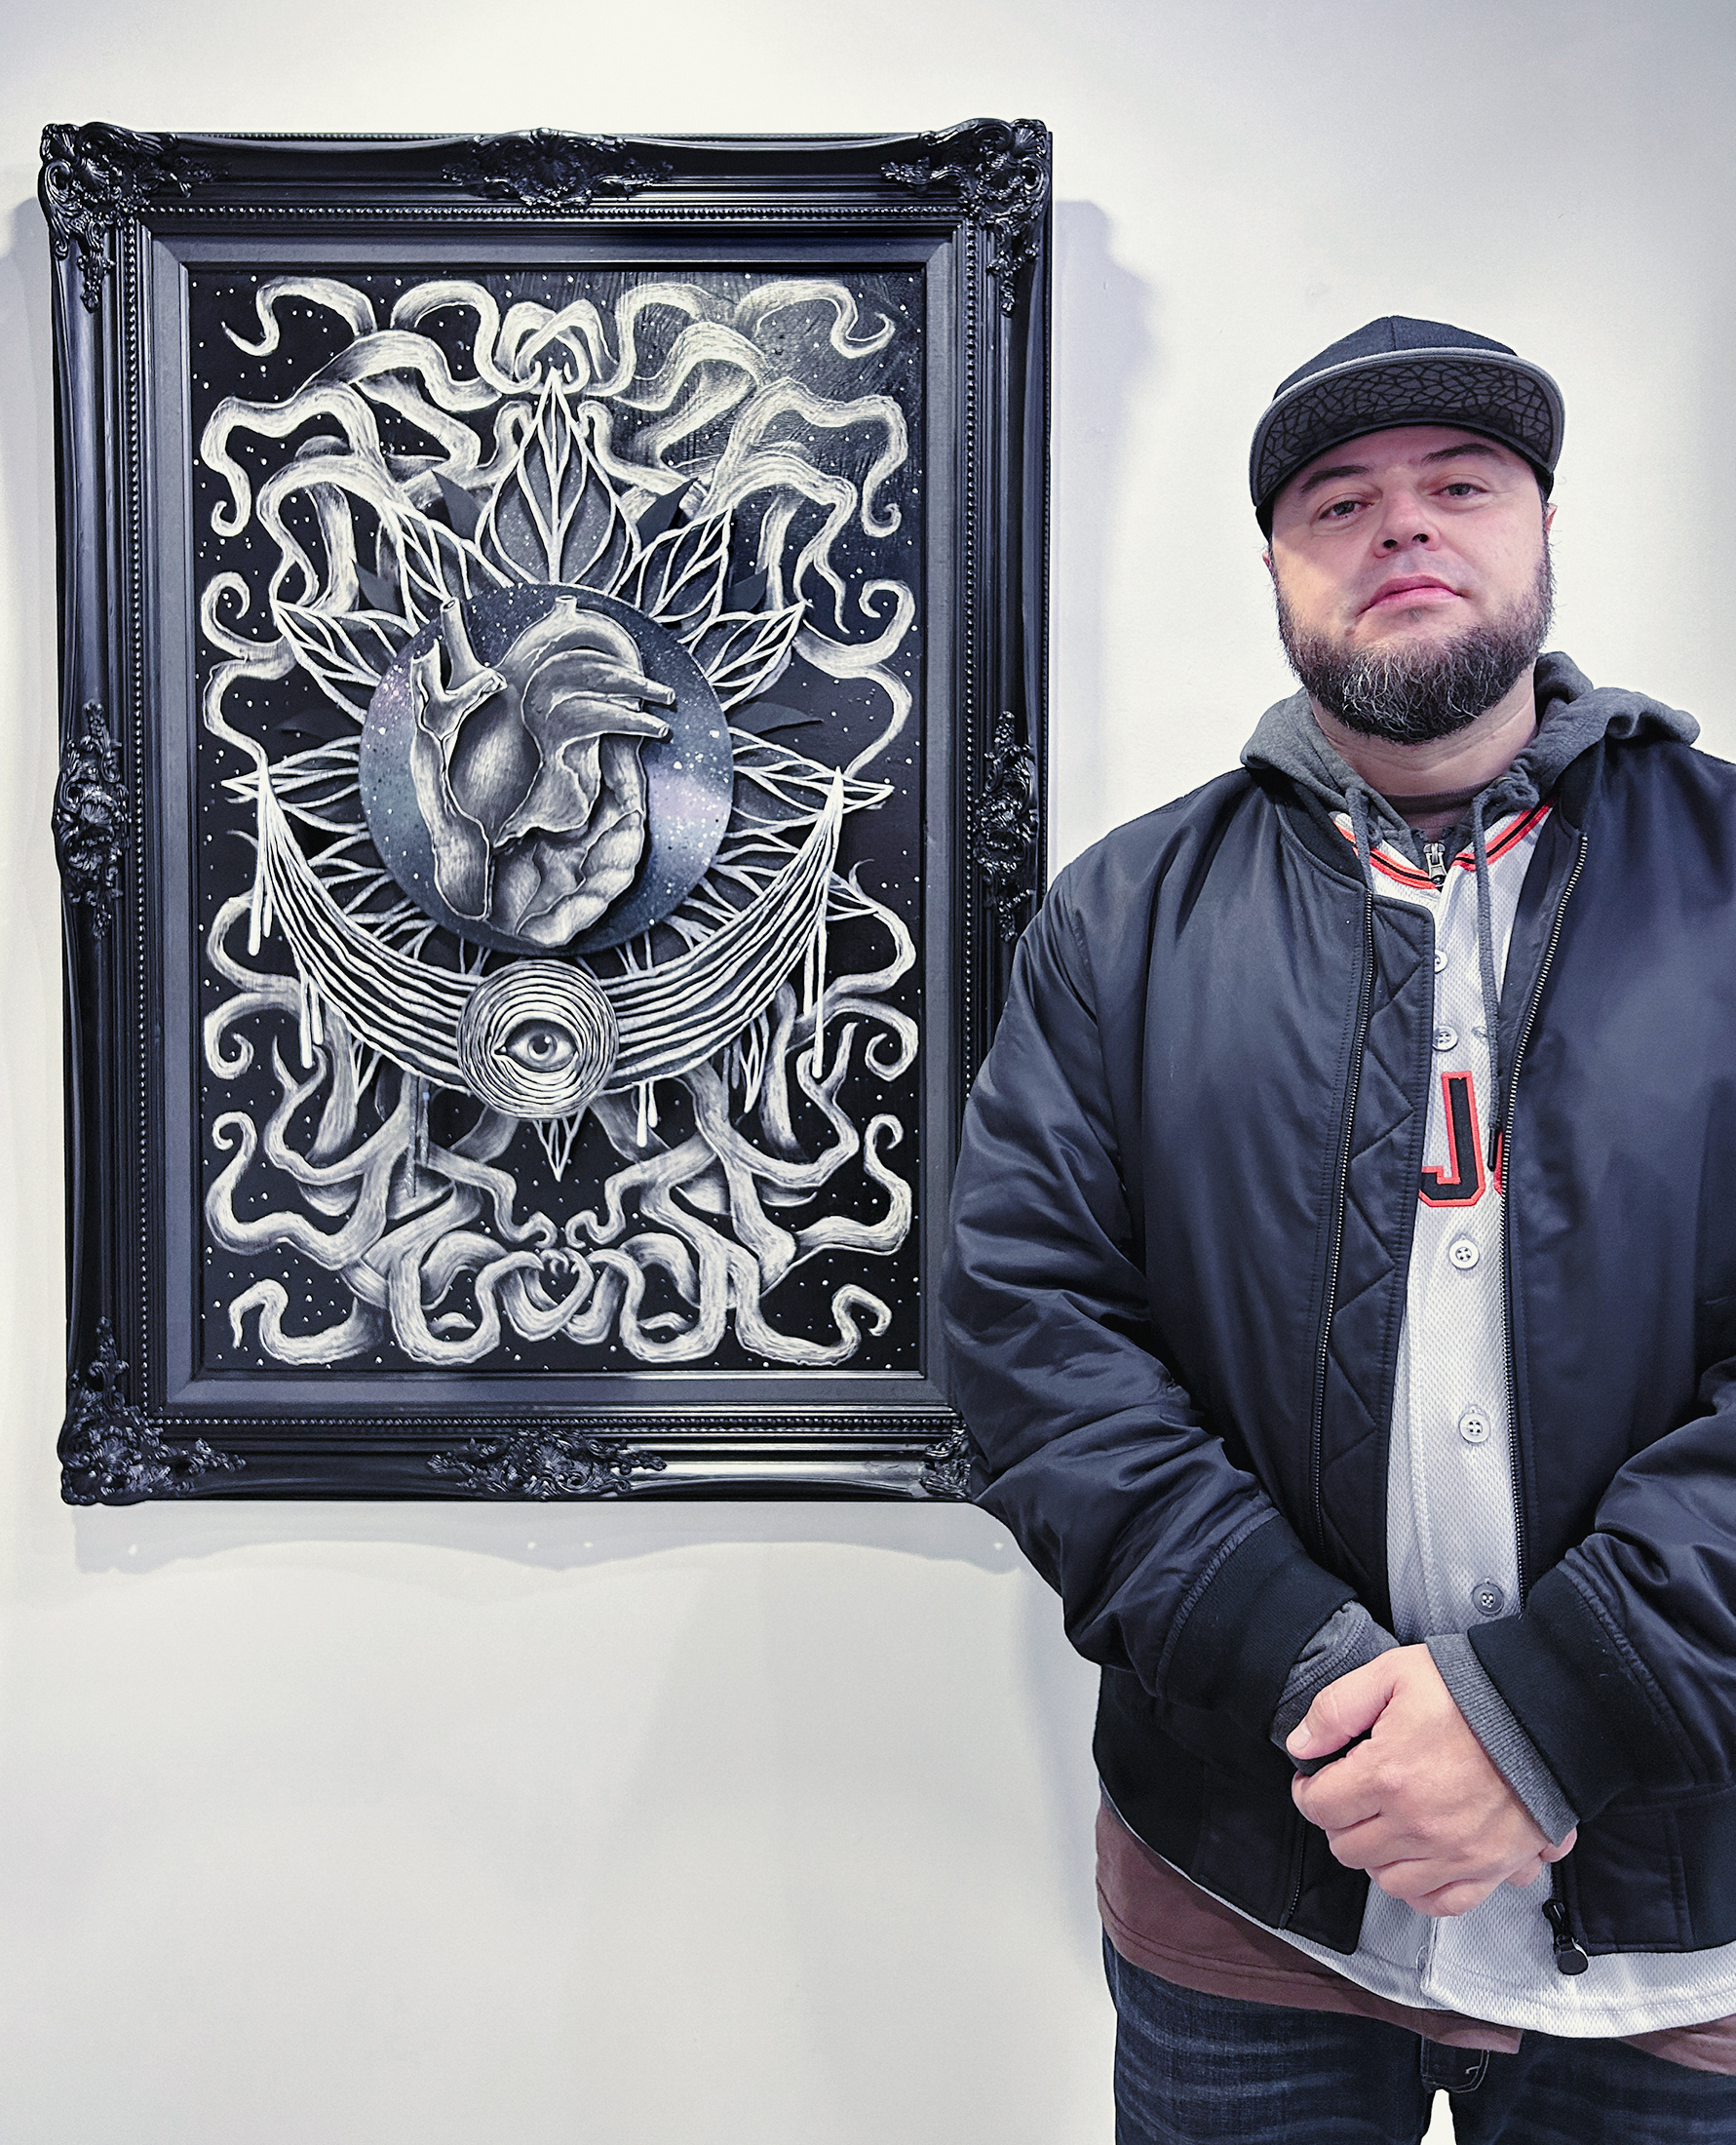 A man with a beard stands beside a framed, black and white ornate drawing